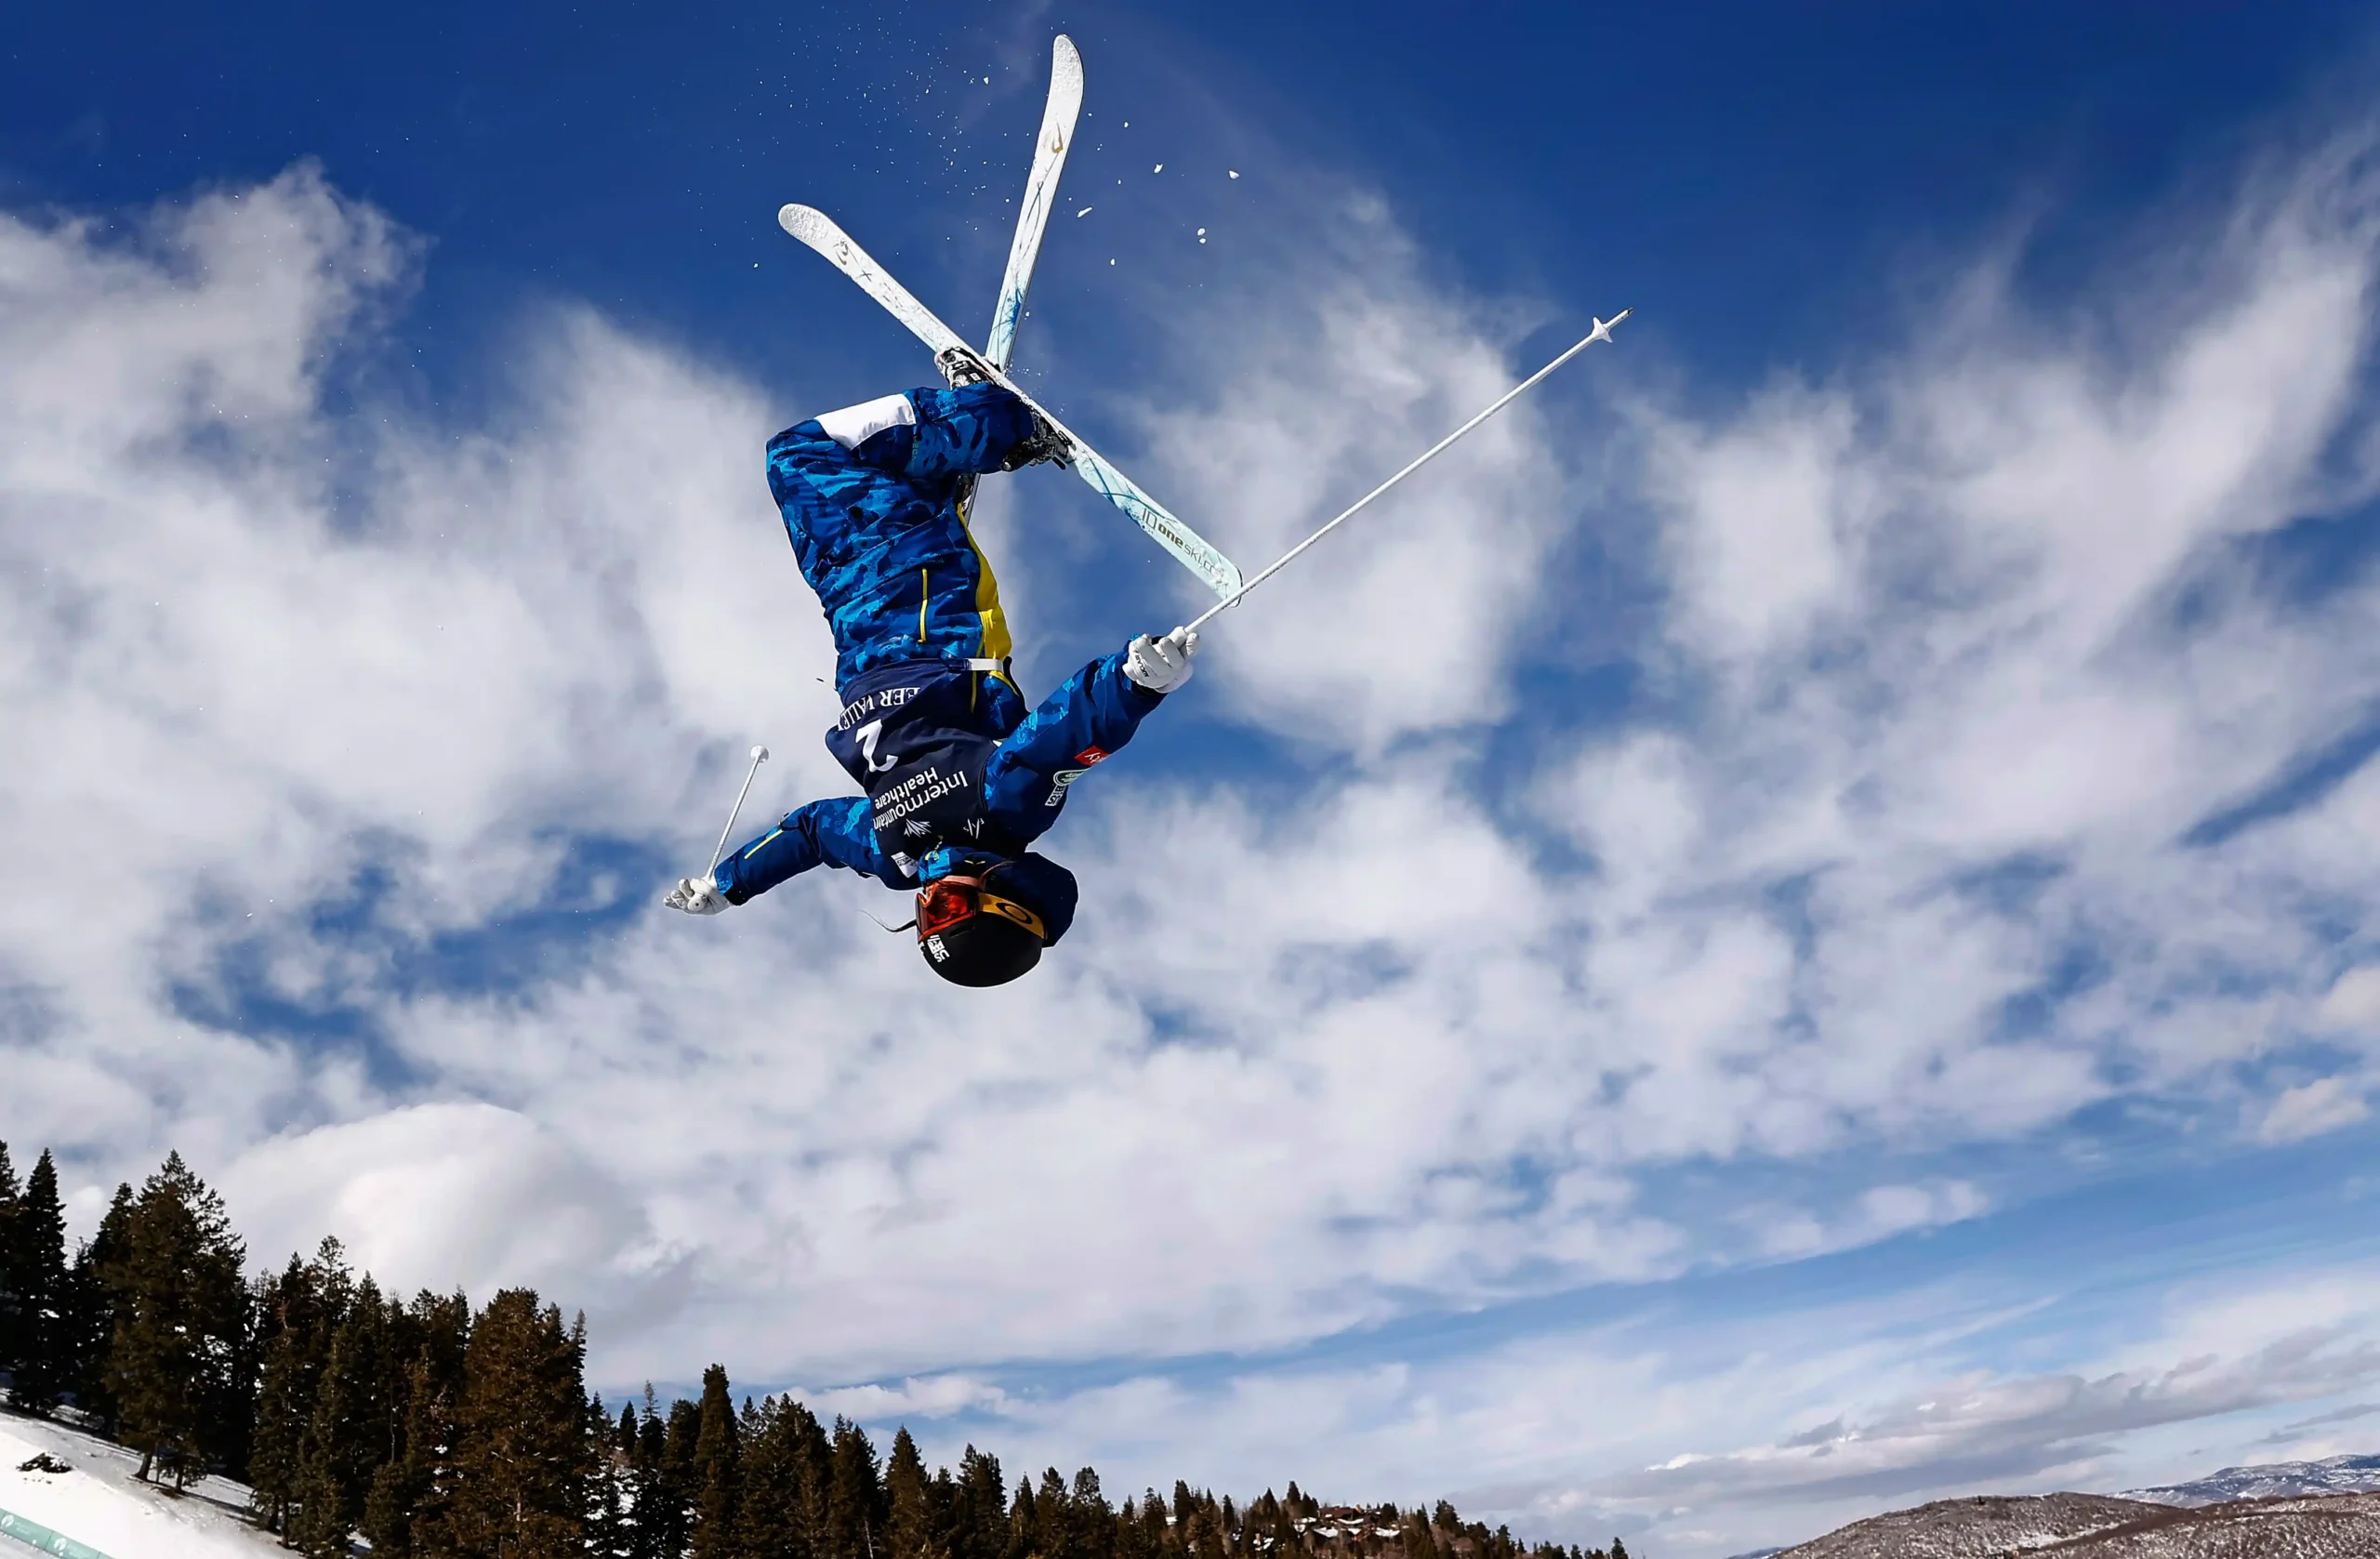 PARK CITY, UTAH - FEBRUARY 02: Jaelin Kauf of the United States takes a training run for the Woman's Moguls during the 2021 Intermountain Healthcare Freestyle International Ski World Cup at Deer Valley Resort on February 02, 2021 in Park City, Utah.